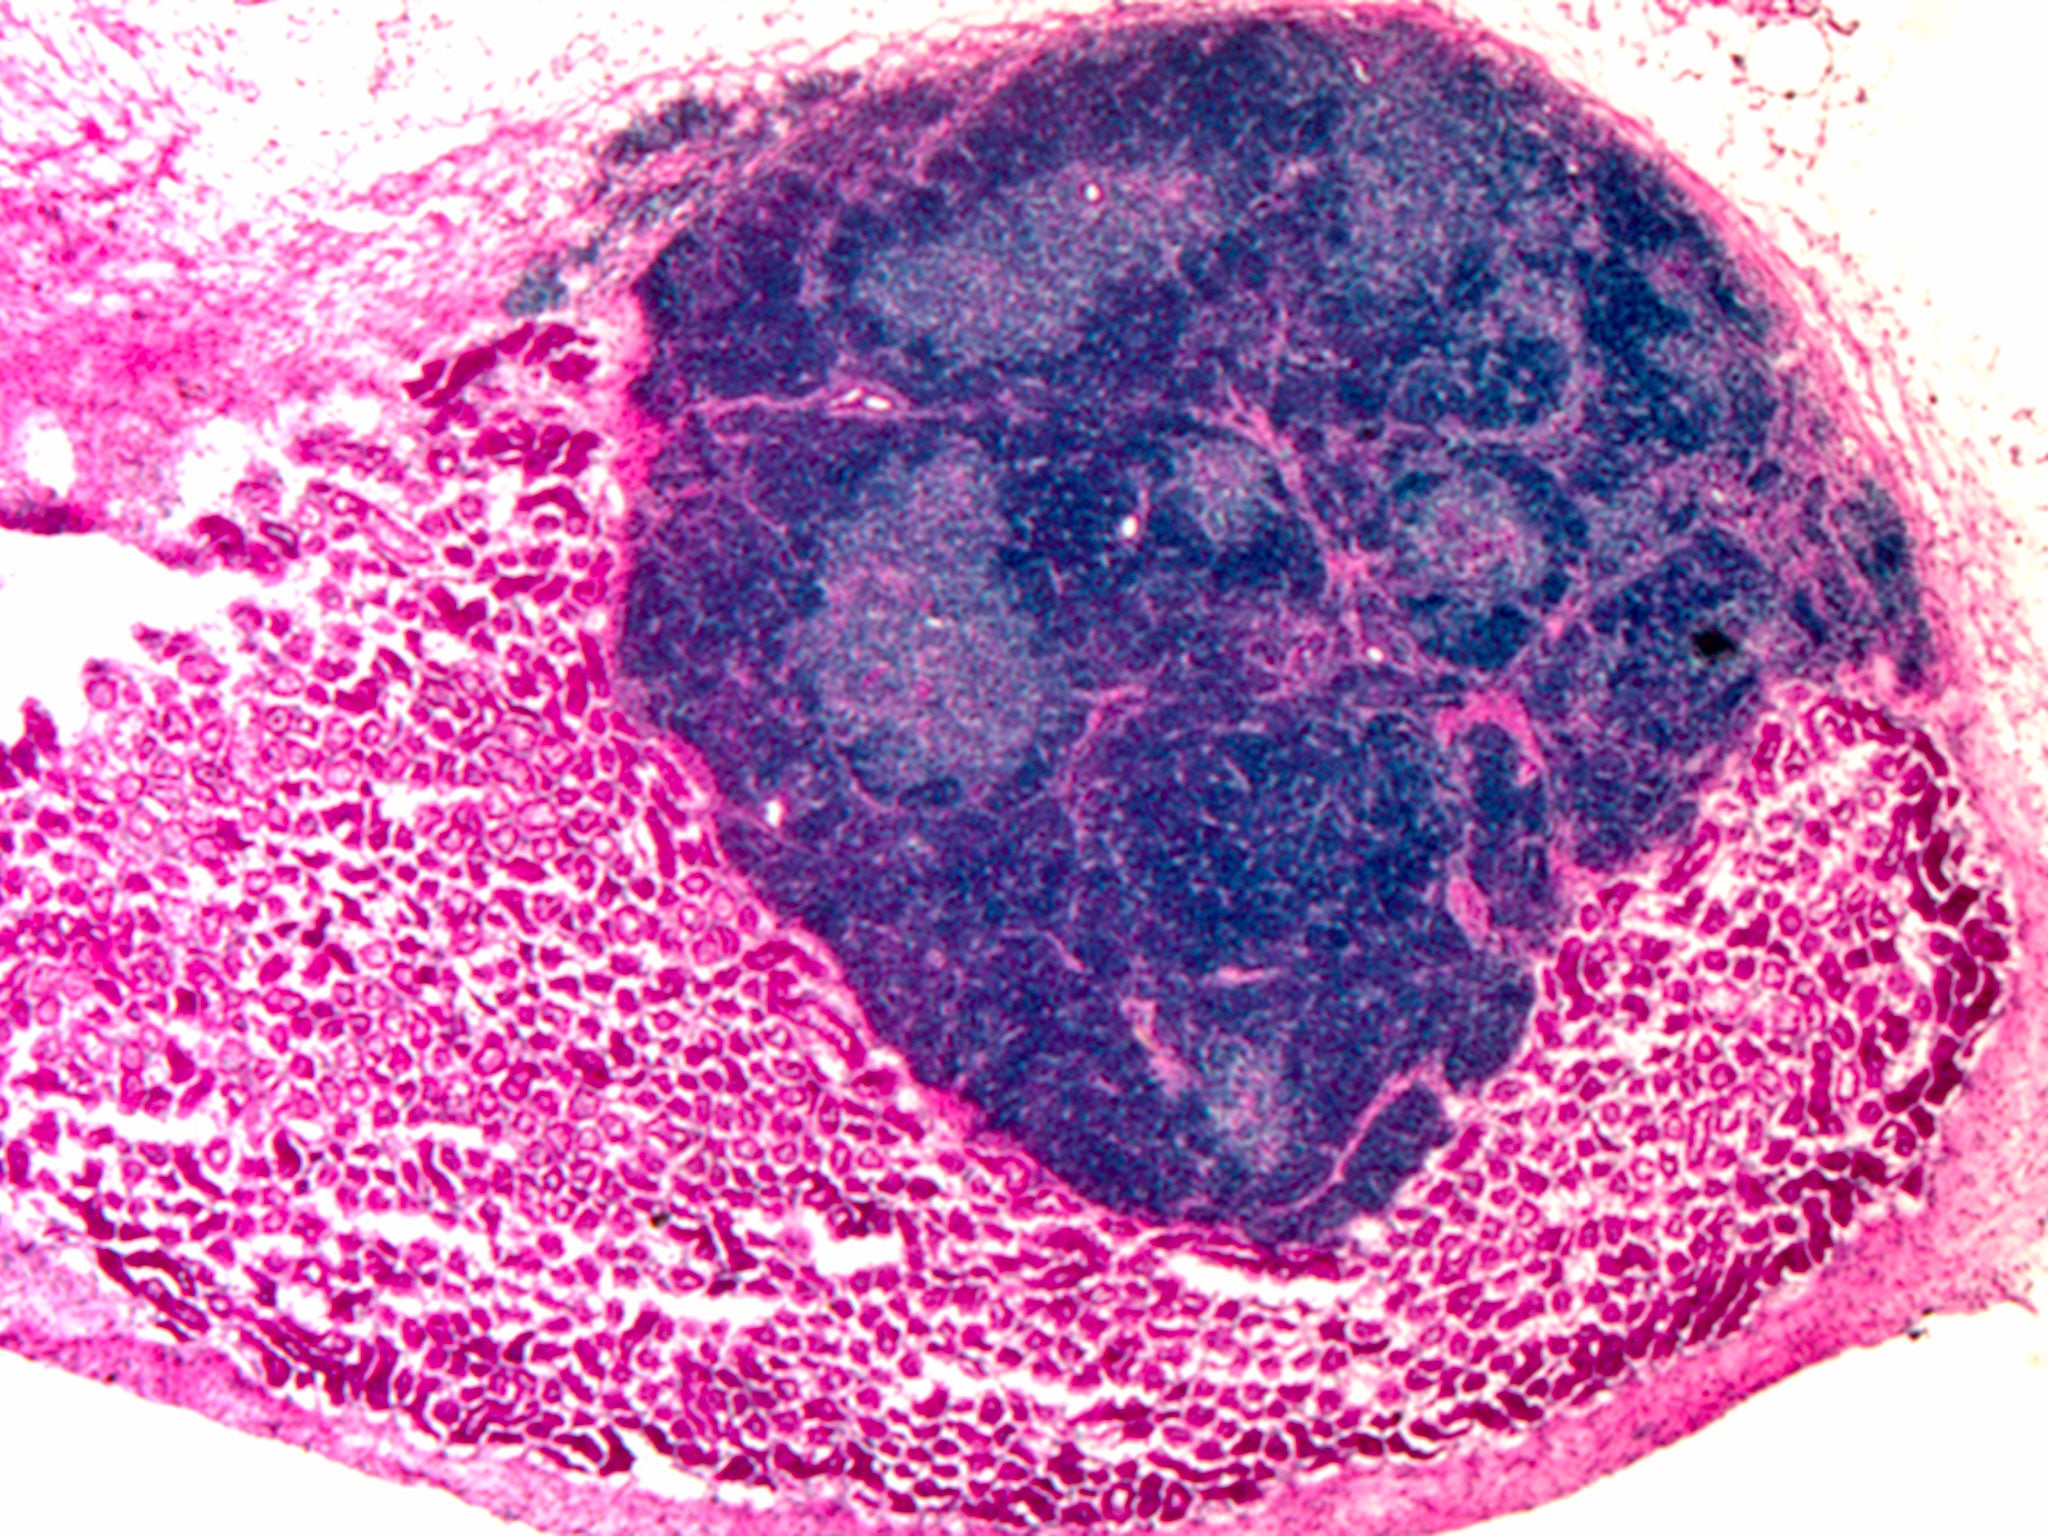 Photo issued by Medical Research Council of induced thymic epithelial cells (iTECs) transplanted onto a mouse kidney to form an organised and functional mini-thymus (Kidney cells in pink; thymus cells dark blue). Reprogrammed cells created in a laboratory